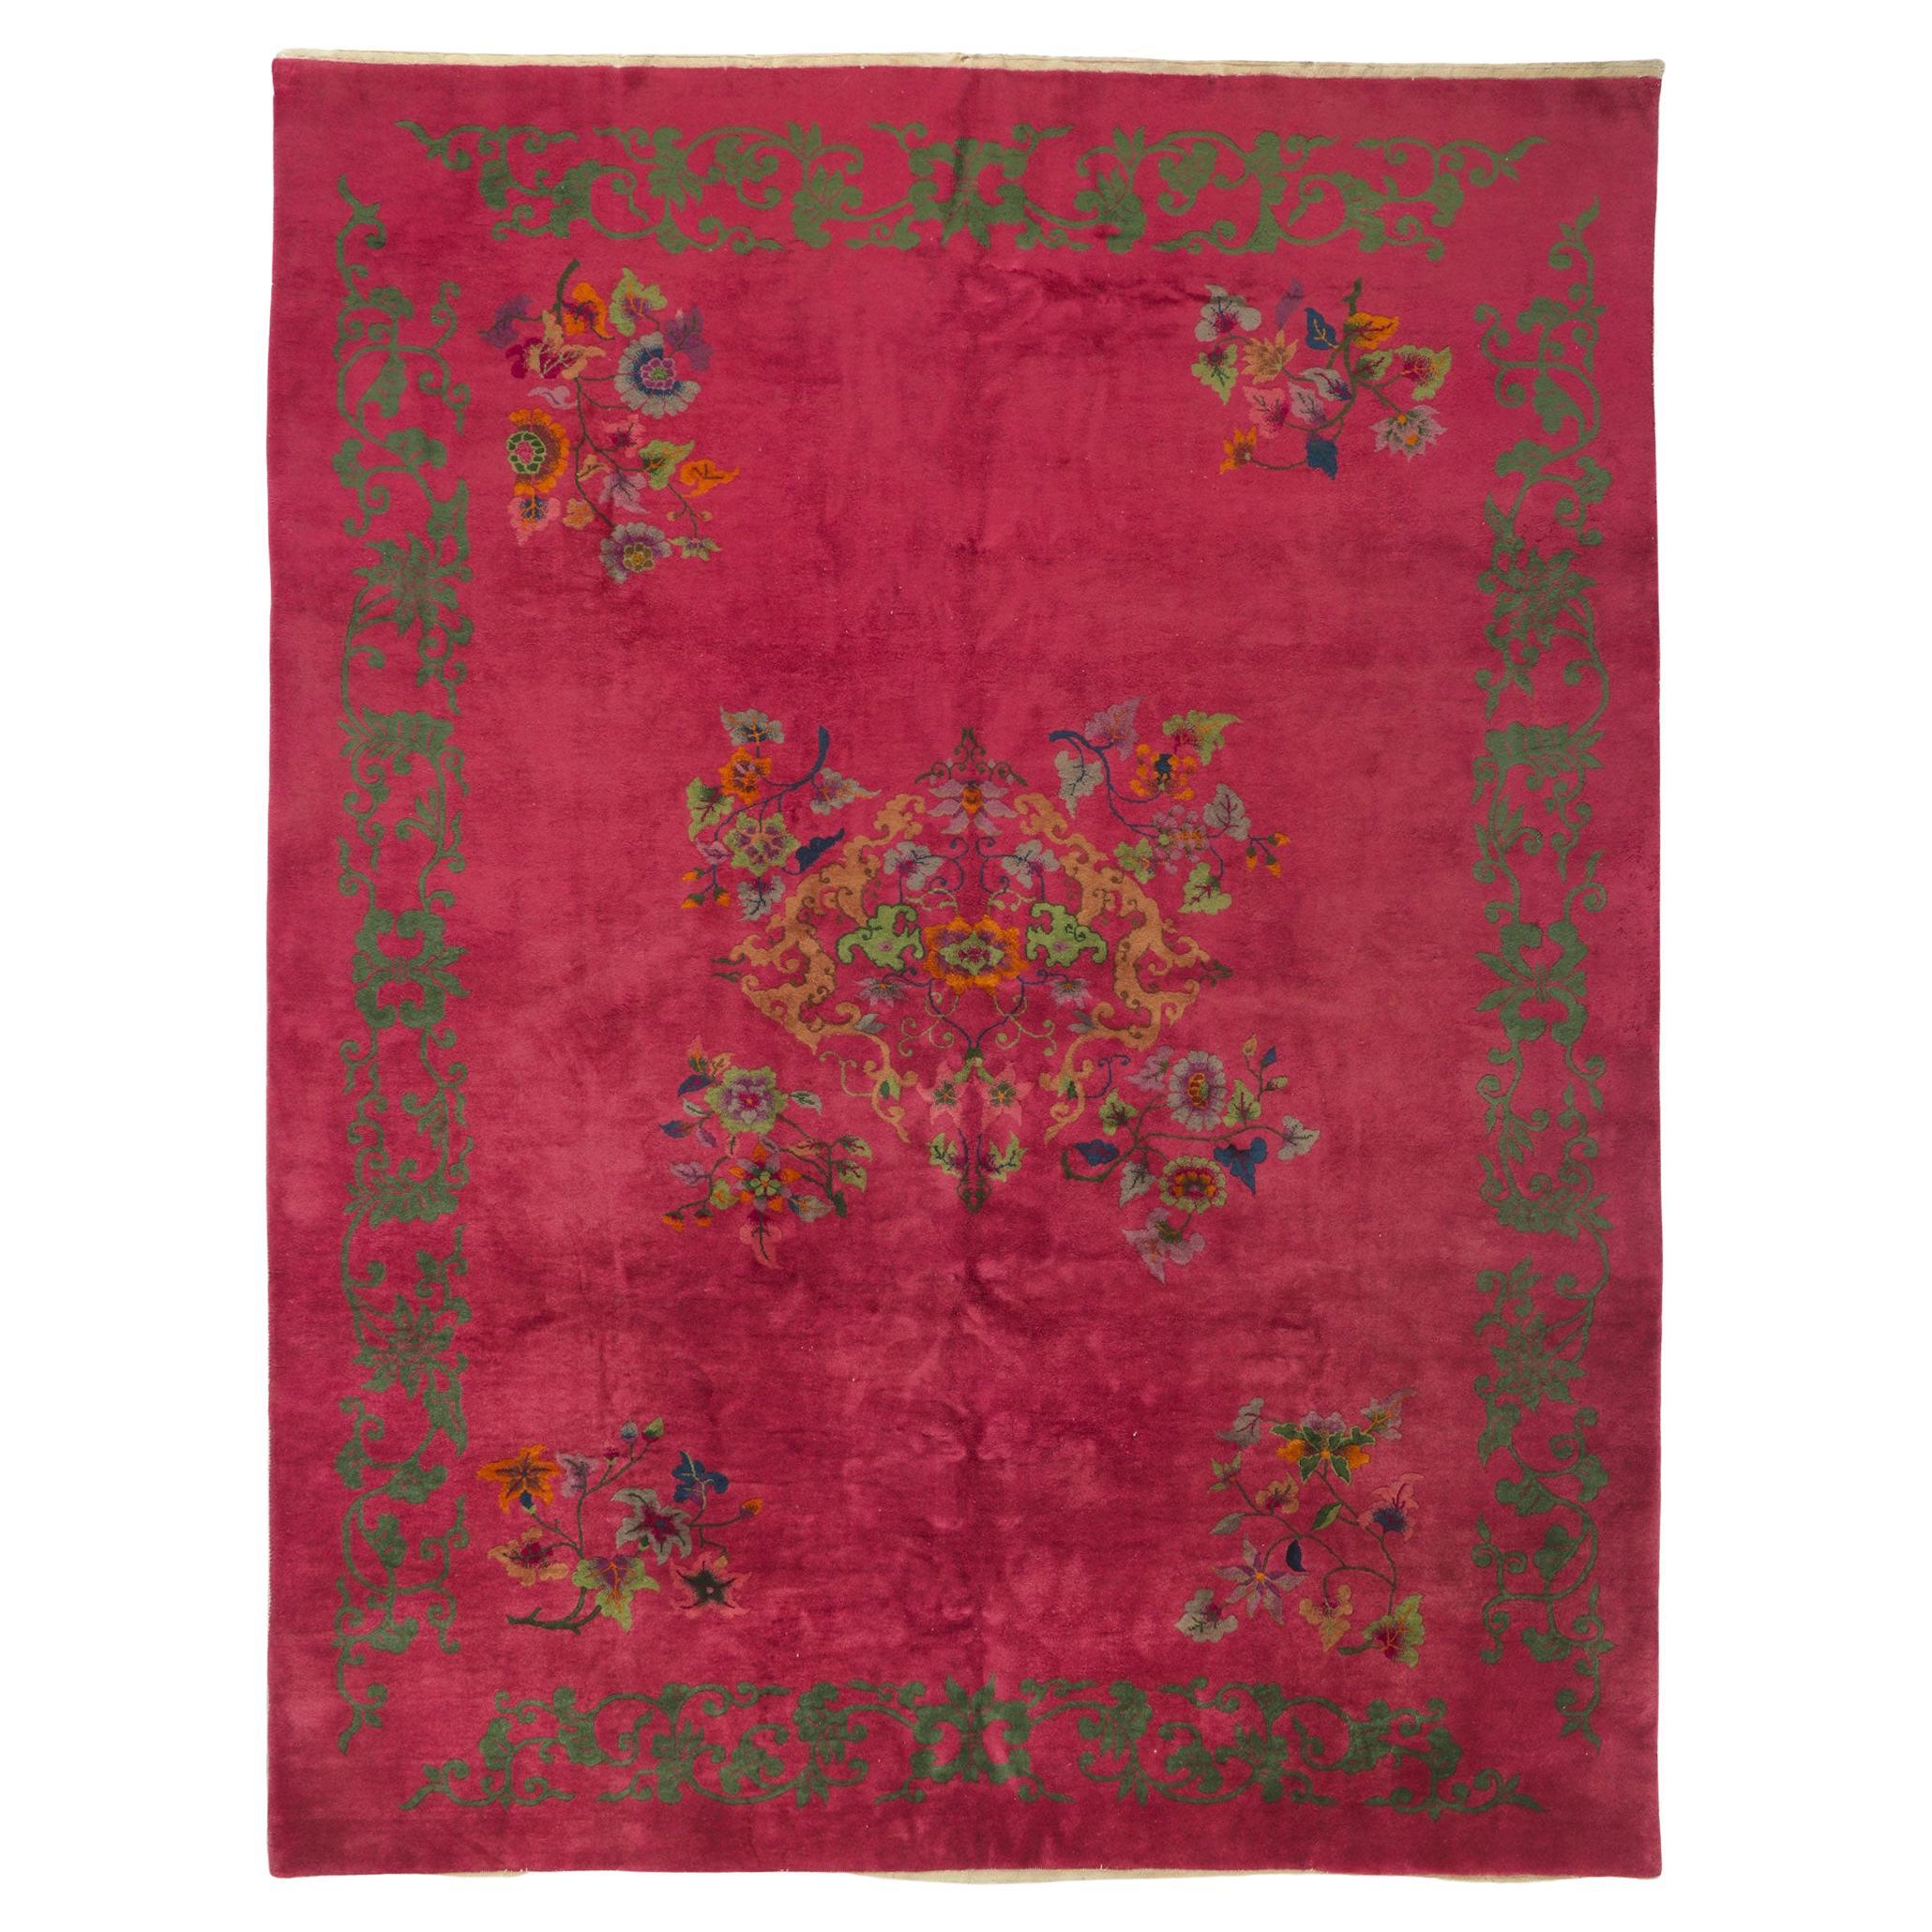 Antique Chinese Art Deco Rug, Sensual Decadence Meets Maximalist Style For Sale